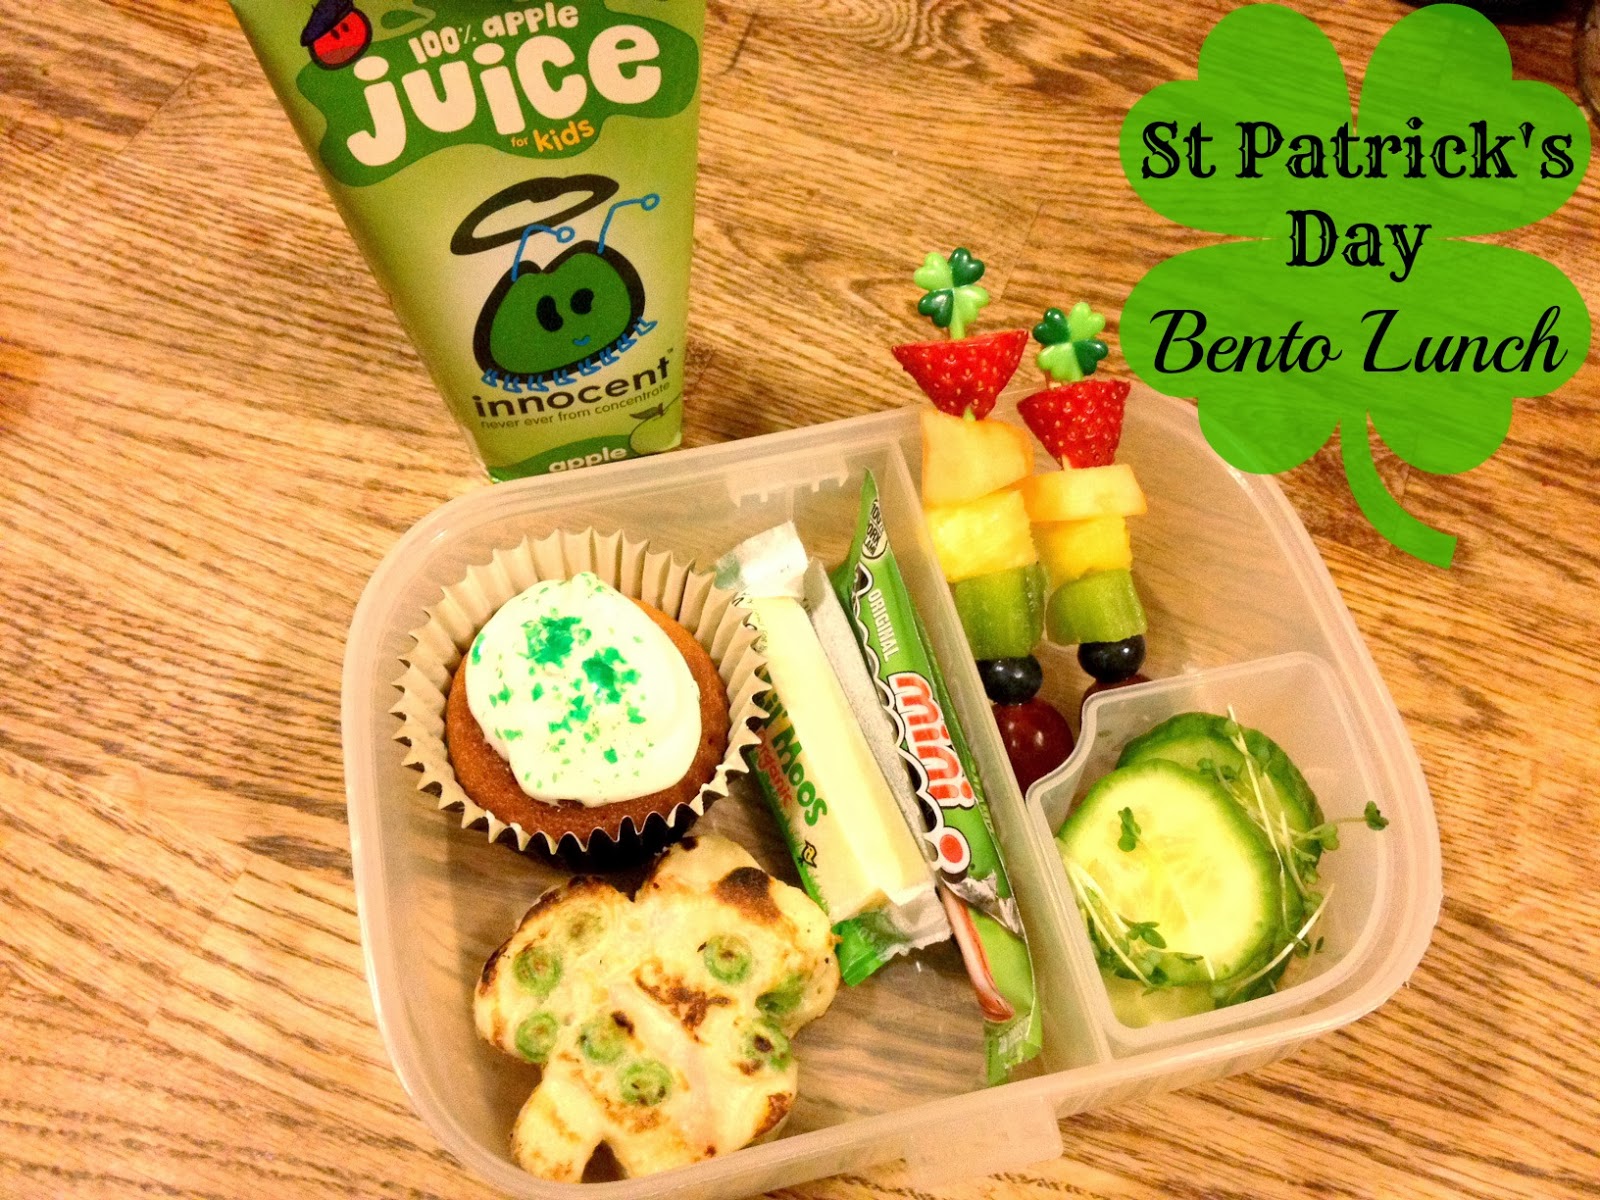 St Patrick's Day Bento Lunch Box